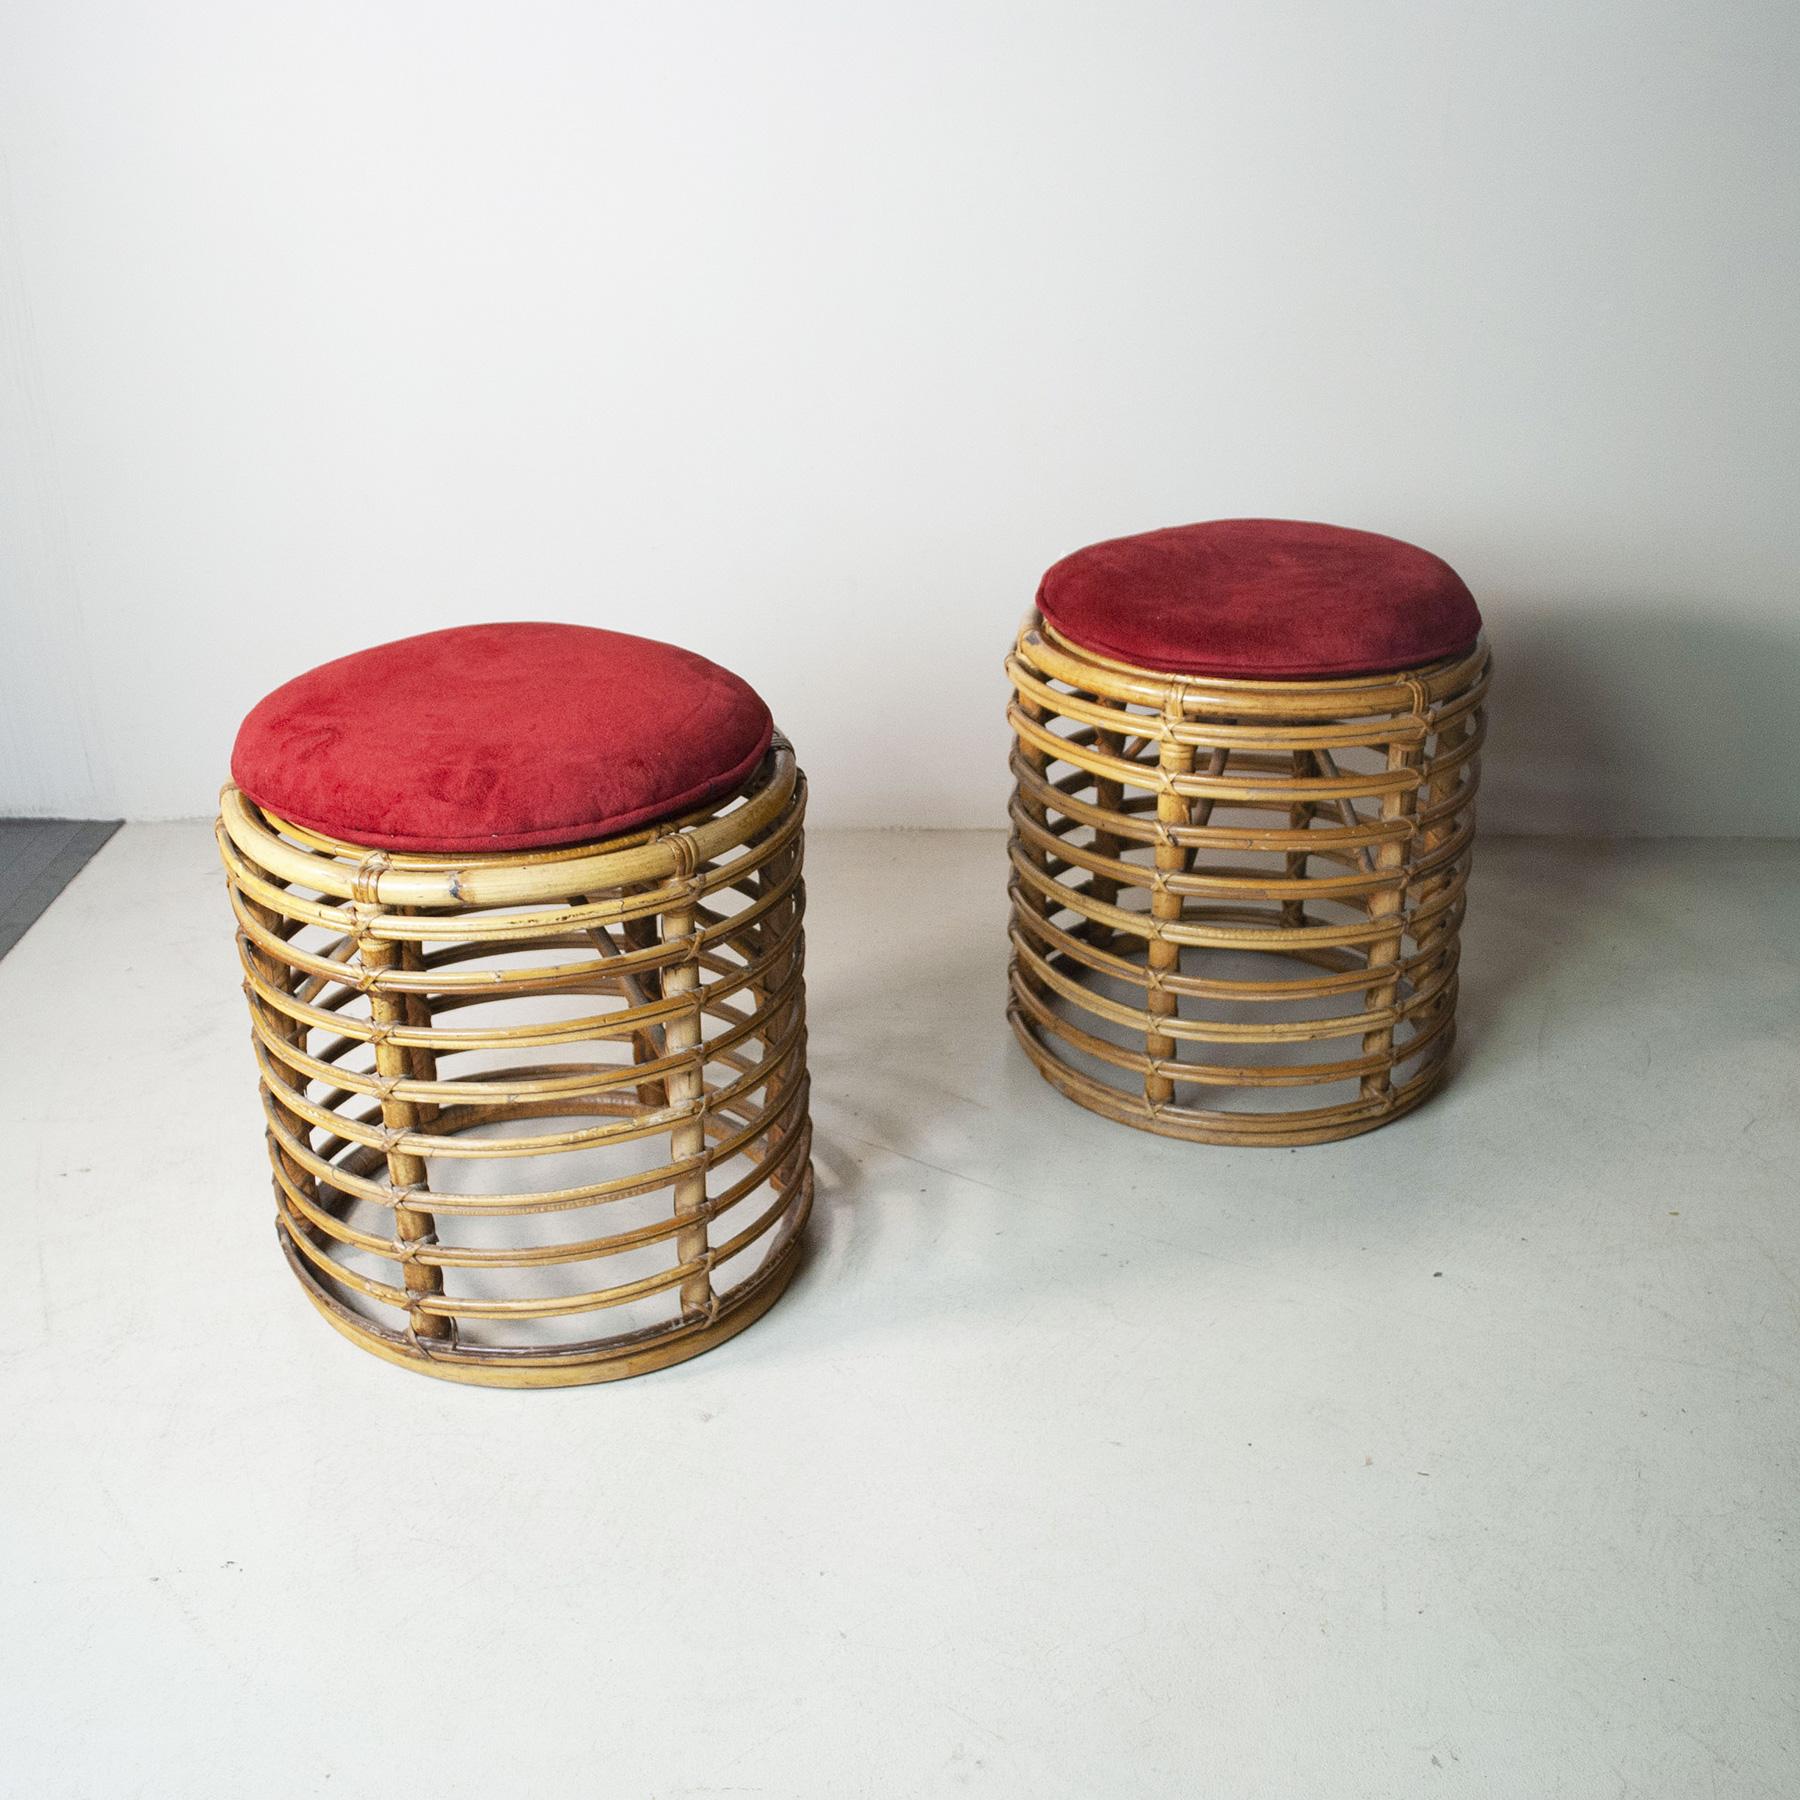 Tito Agnoli set of two bamboo stools 1960s.

Tito Agnoli was born in Lima, Peru, in 1931 into an Italian family. He returned to Italy after the war. A painter by training (he studied with Sironi), in 1949 he enrolled in the Faculty of Architecture,